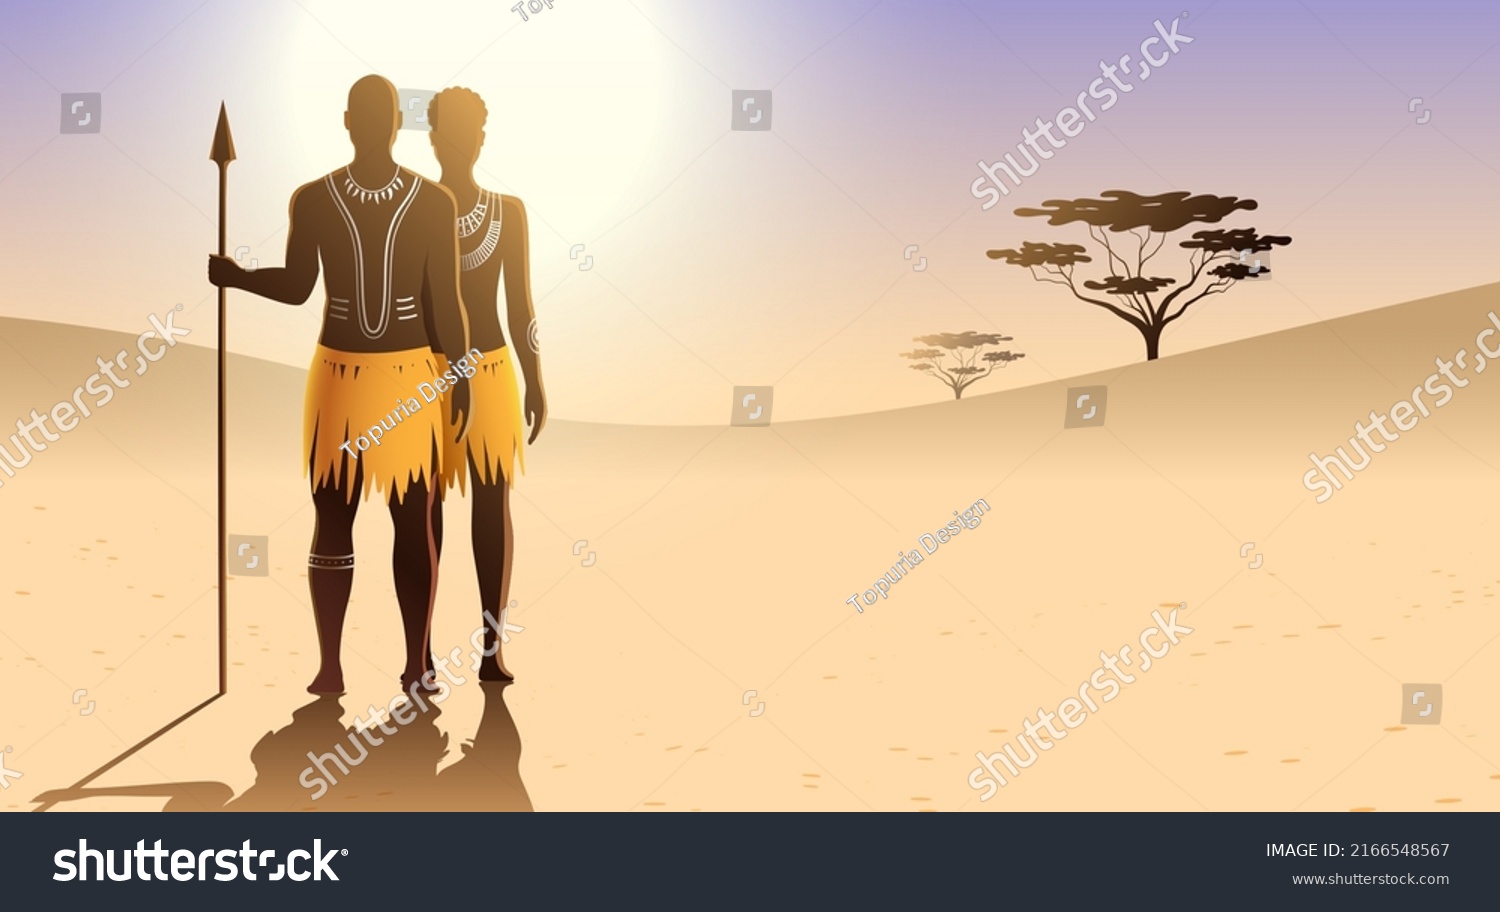 African Aborigine Man Woman Traditional Body Stock Vector Royalty Free 2166548567 Shutterstock 